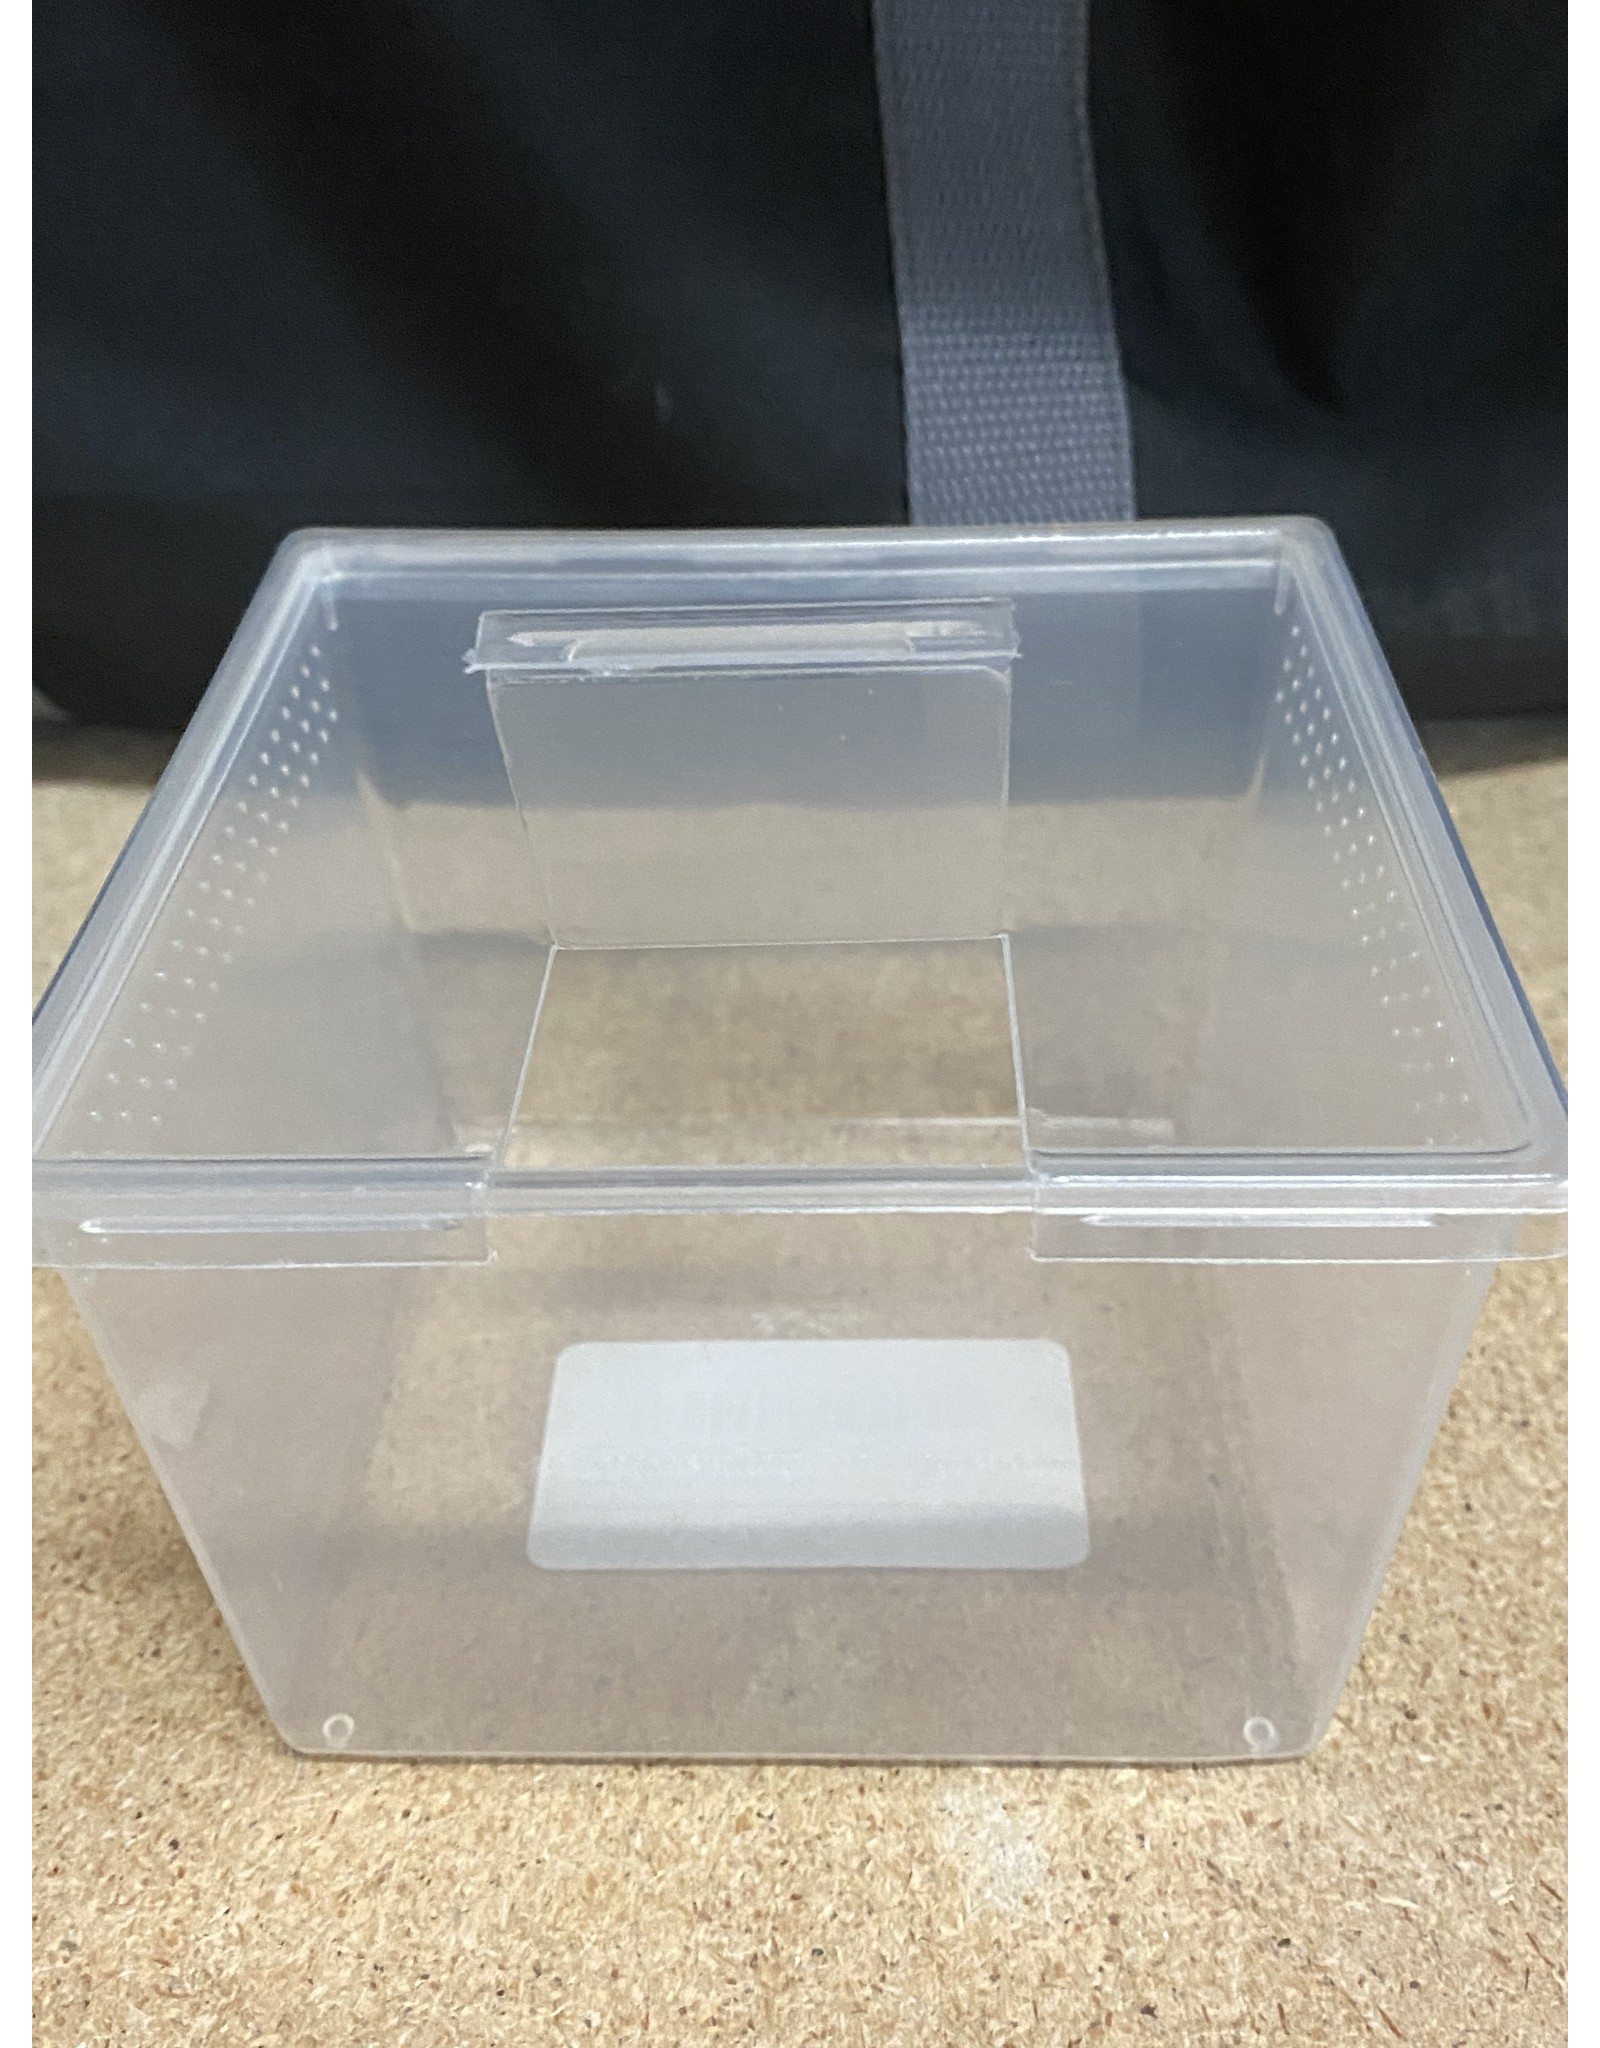 Pro-Kal PRO-KAL Square Punched Deli Container with Lid